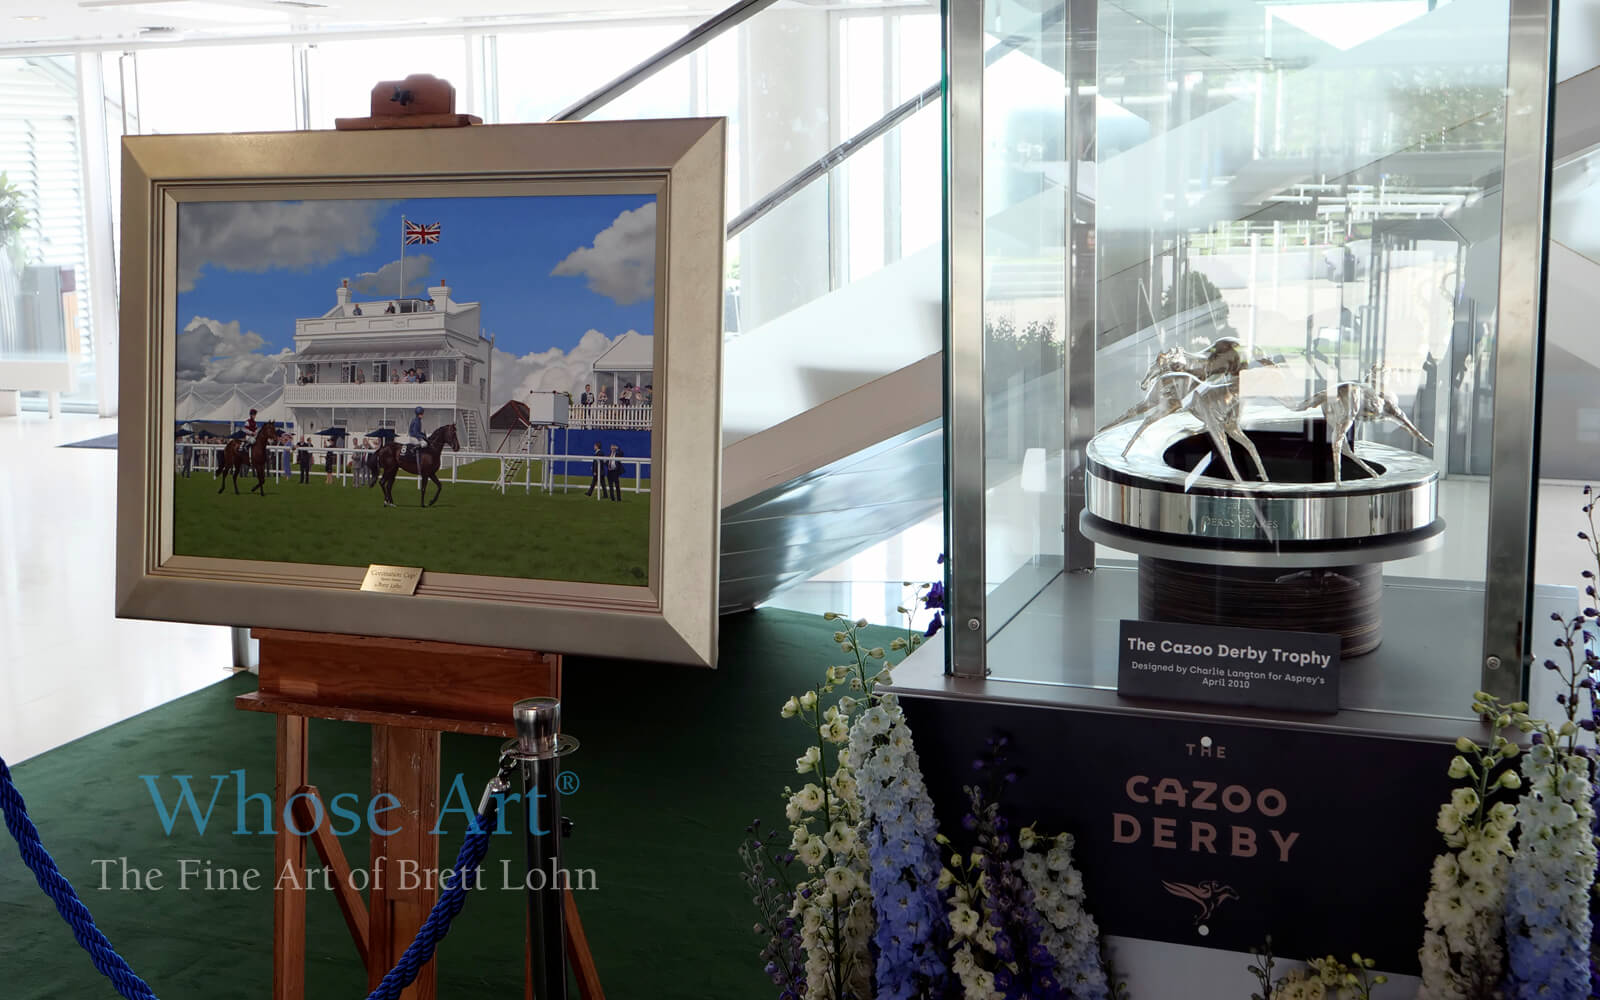 Epsom Derby Art Painting by Brett Lohn exhibited next to the Derby Trophy